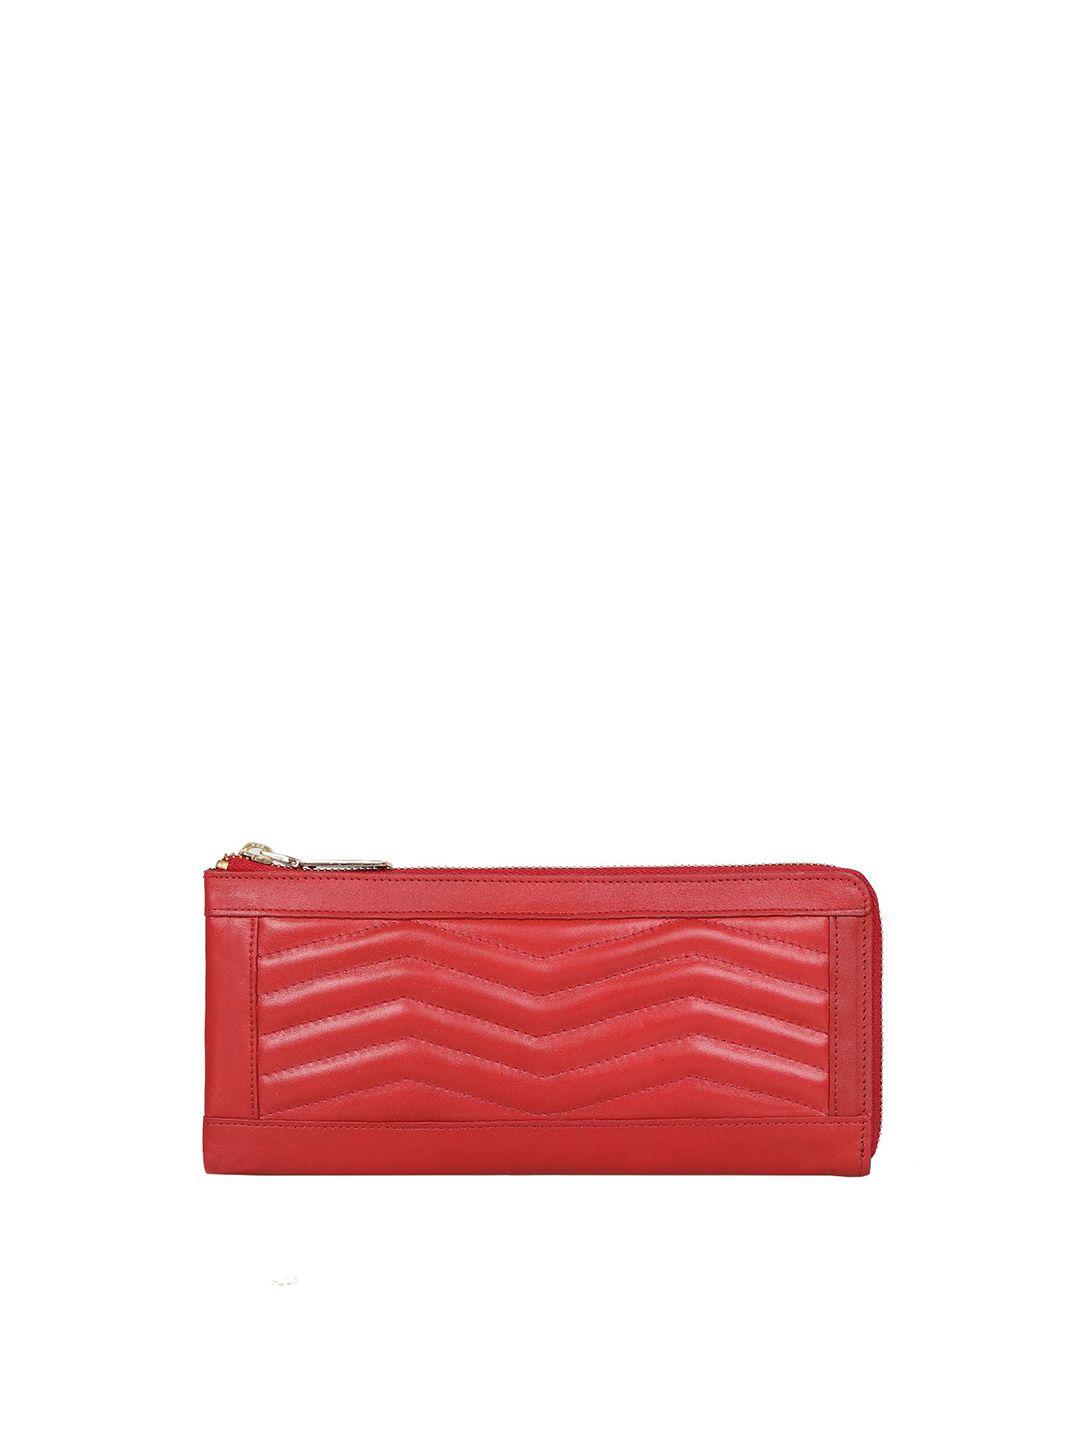 hidesign red textured leather purse clutch